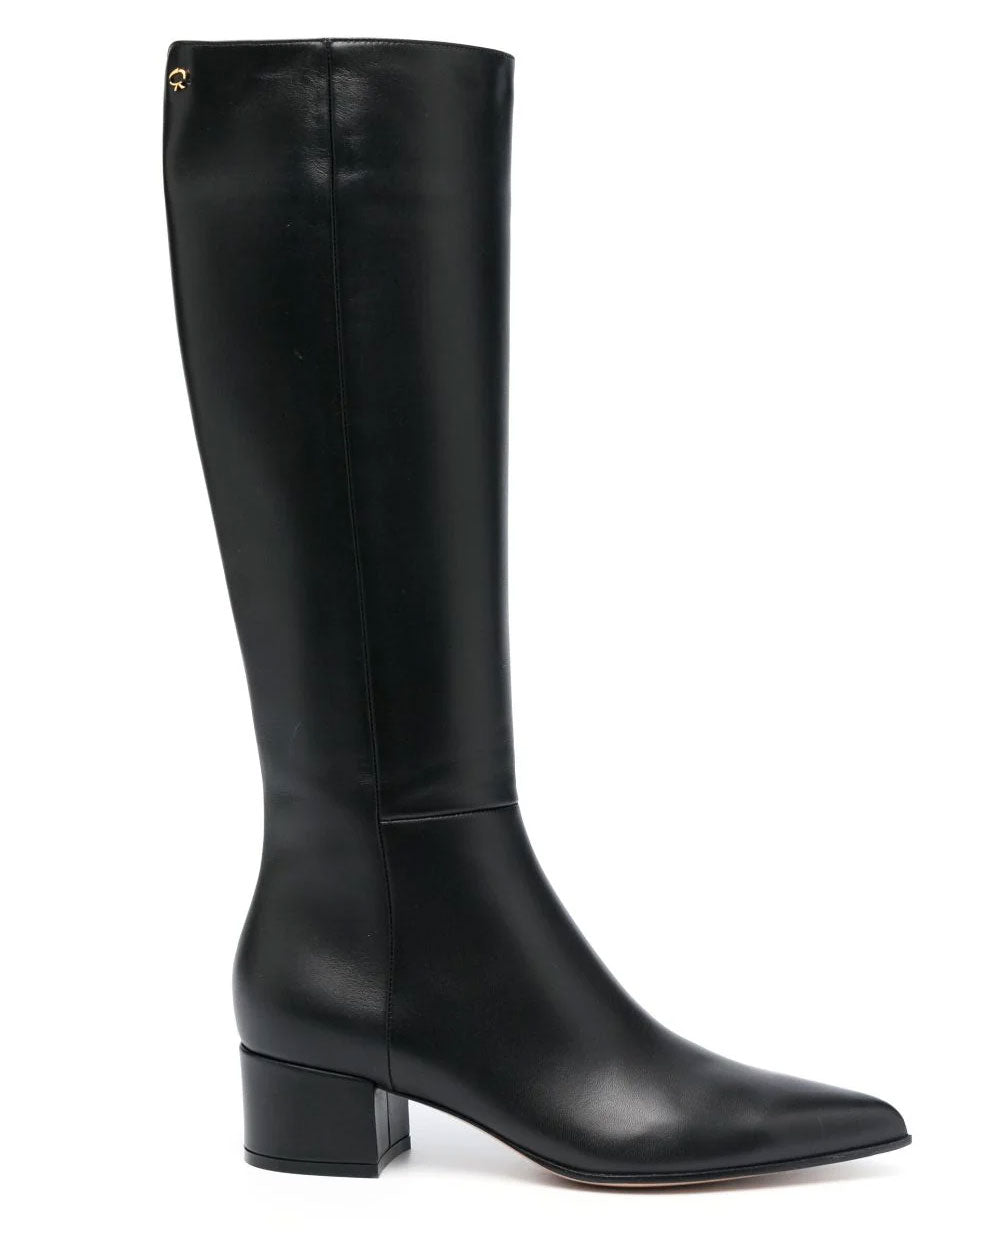 Lyell 45 Boot in Black